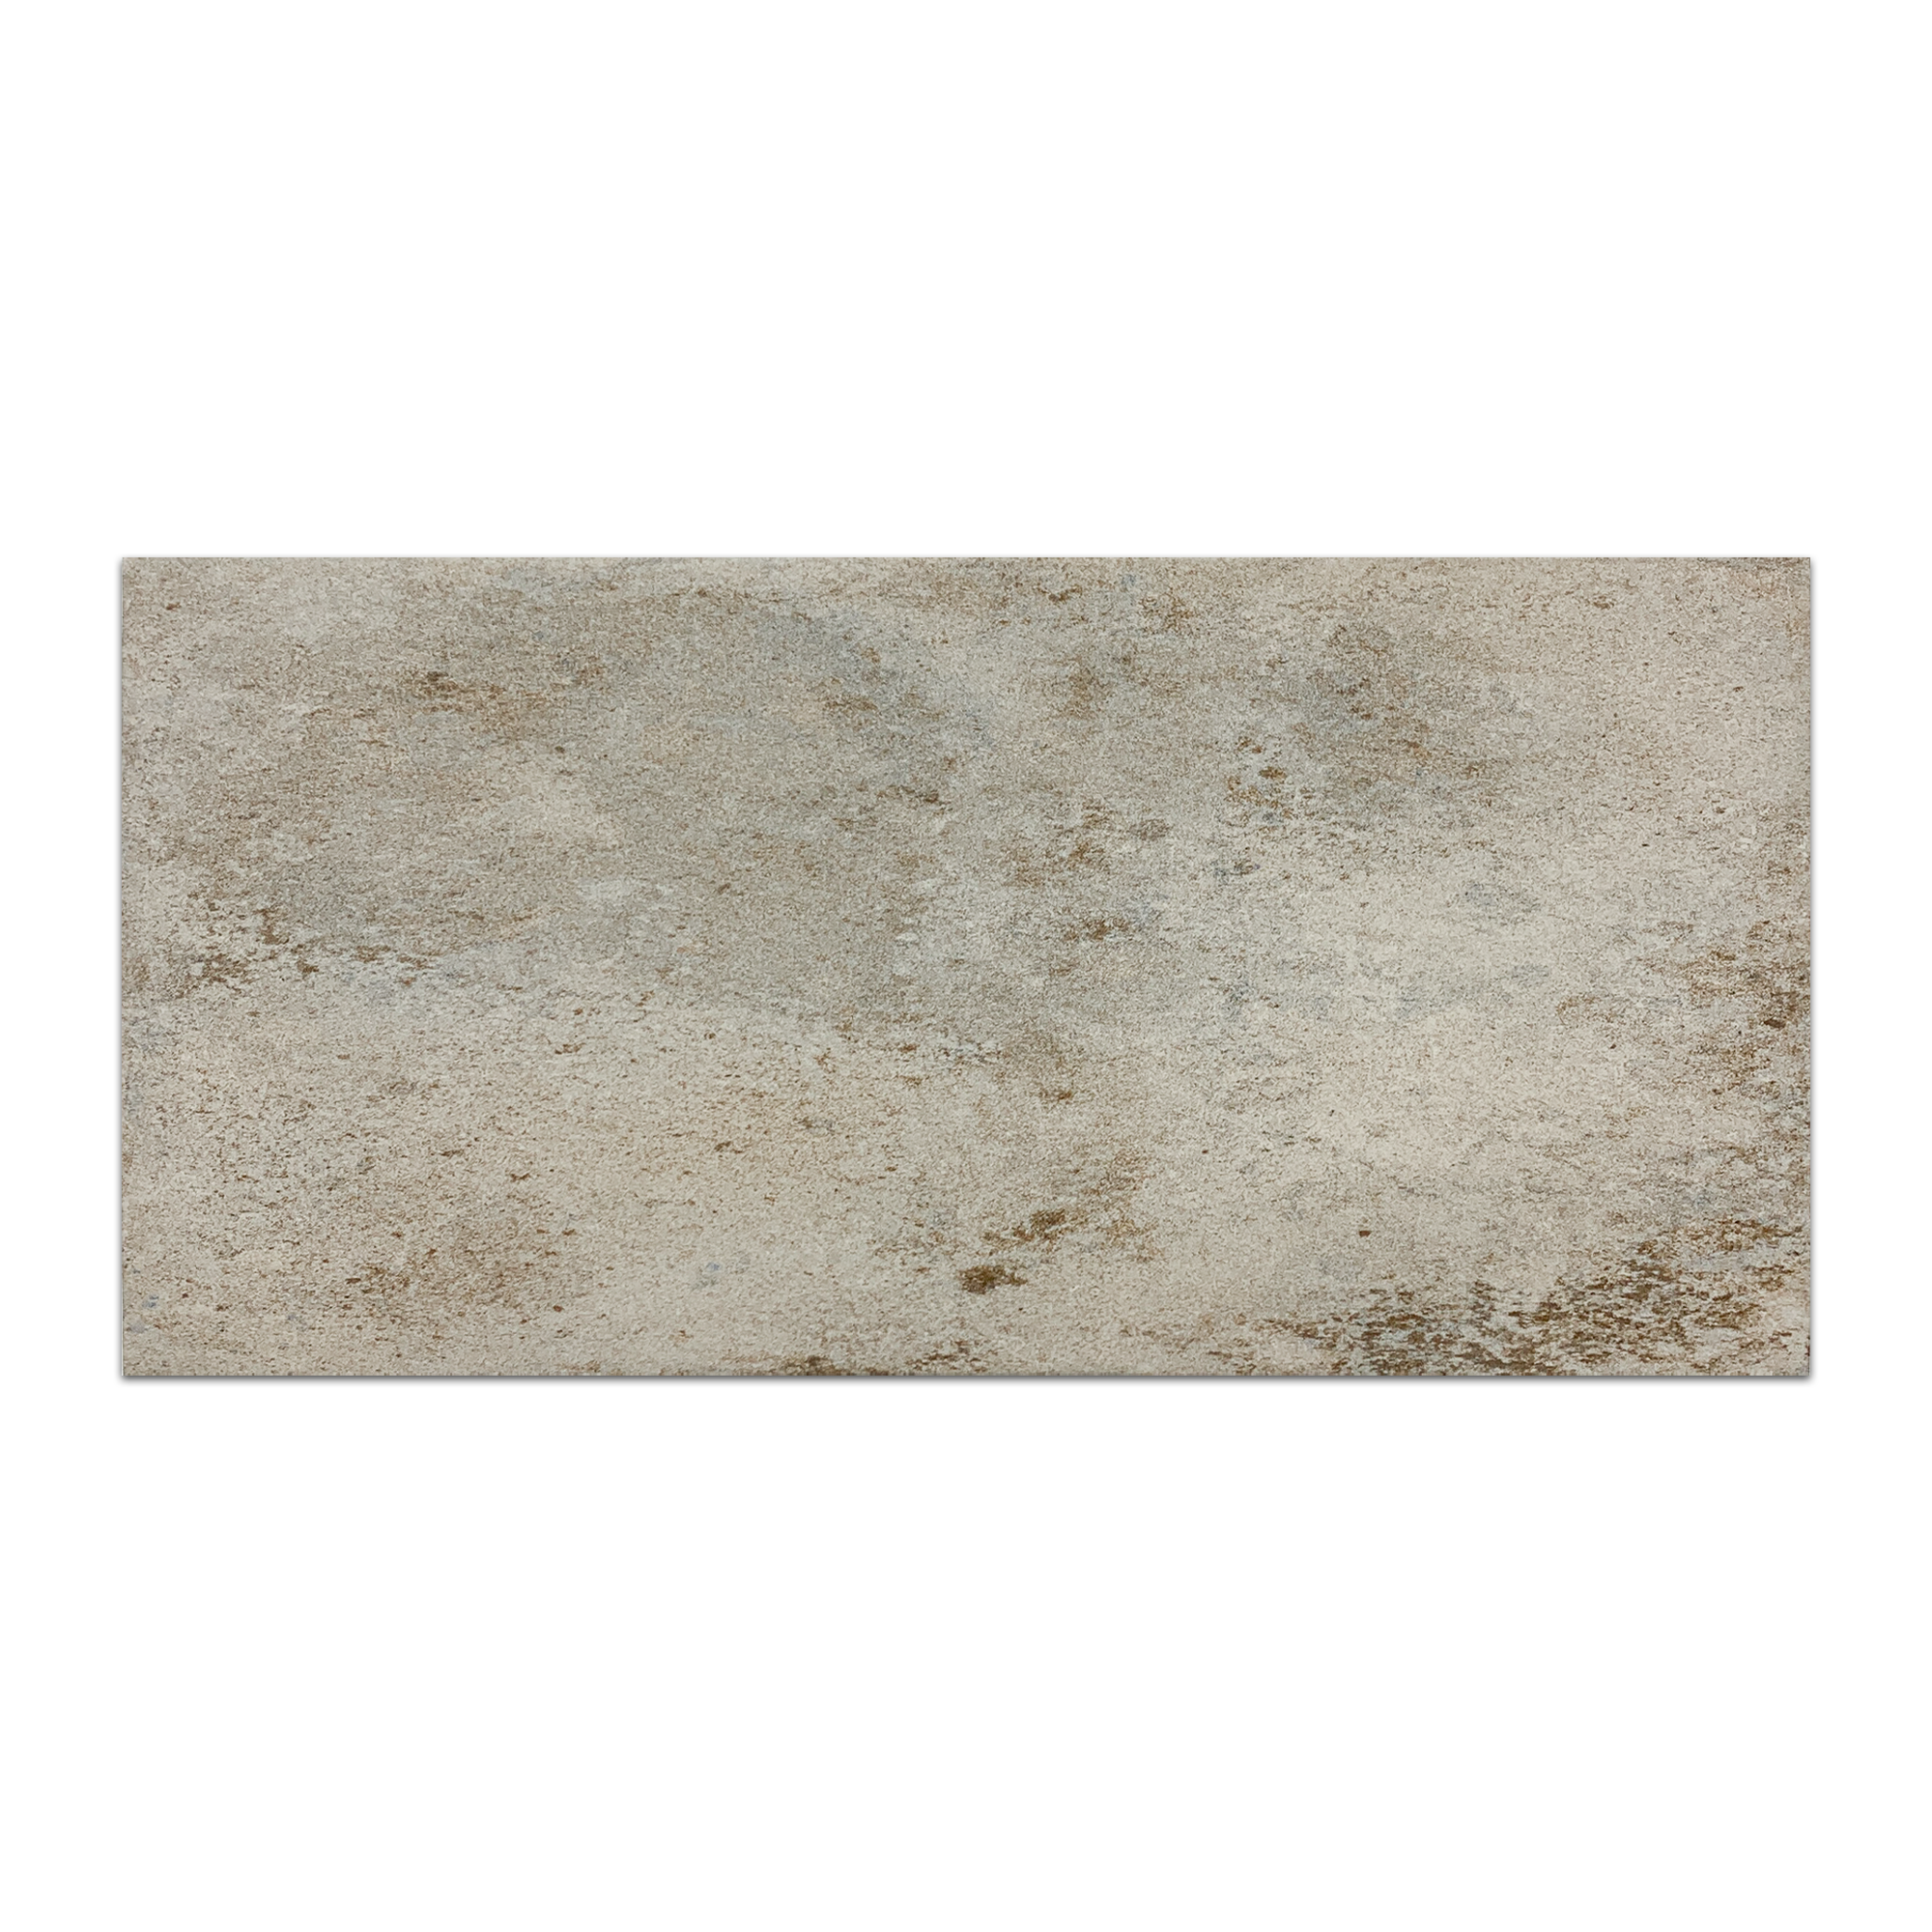 Elon Boston Brick Downtown 8.8x17.7 inch Porcelain Rectangular Field Tile with Natural Pressed Finish for Flooring and Wall, SKU BC111.